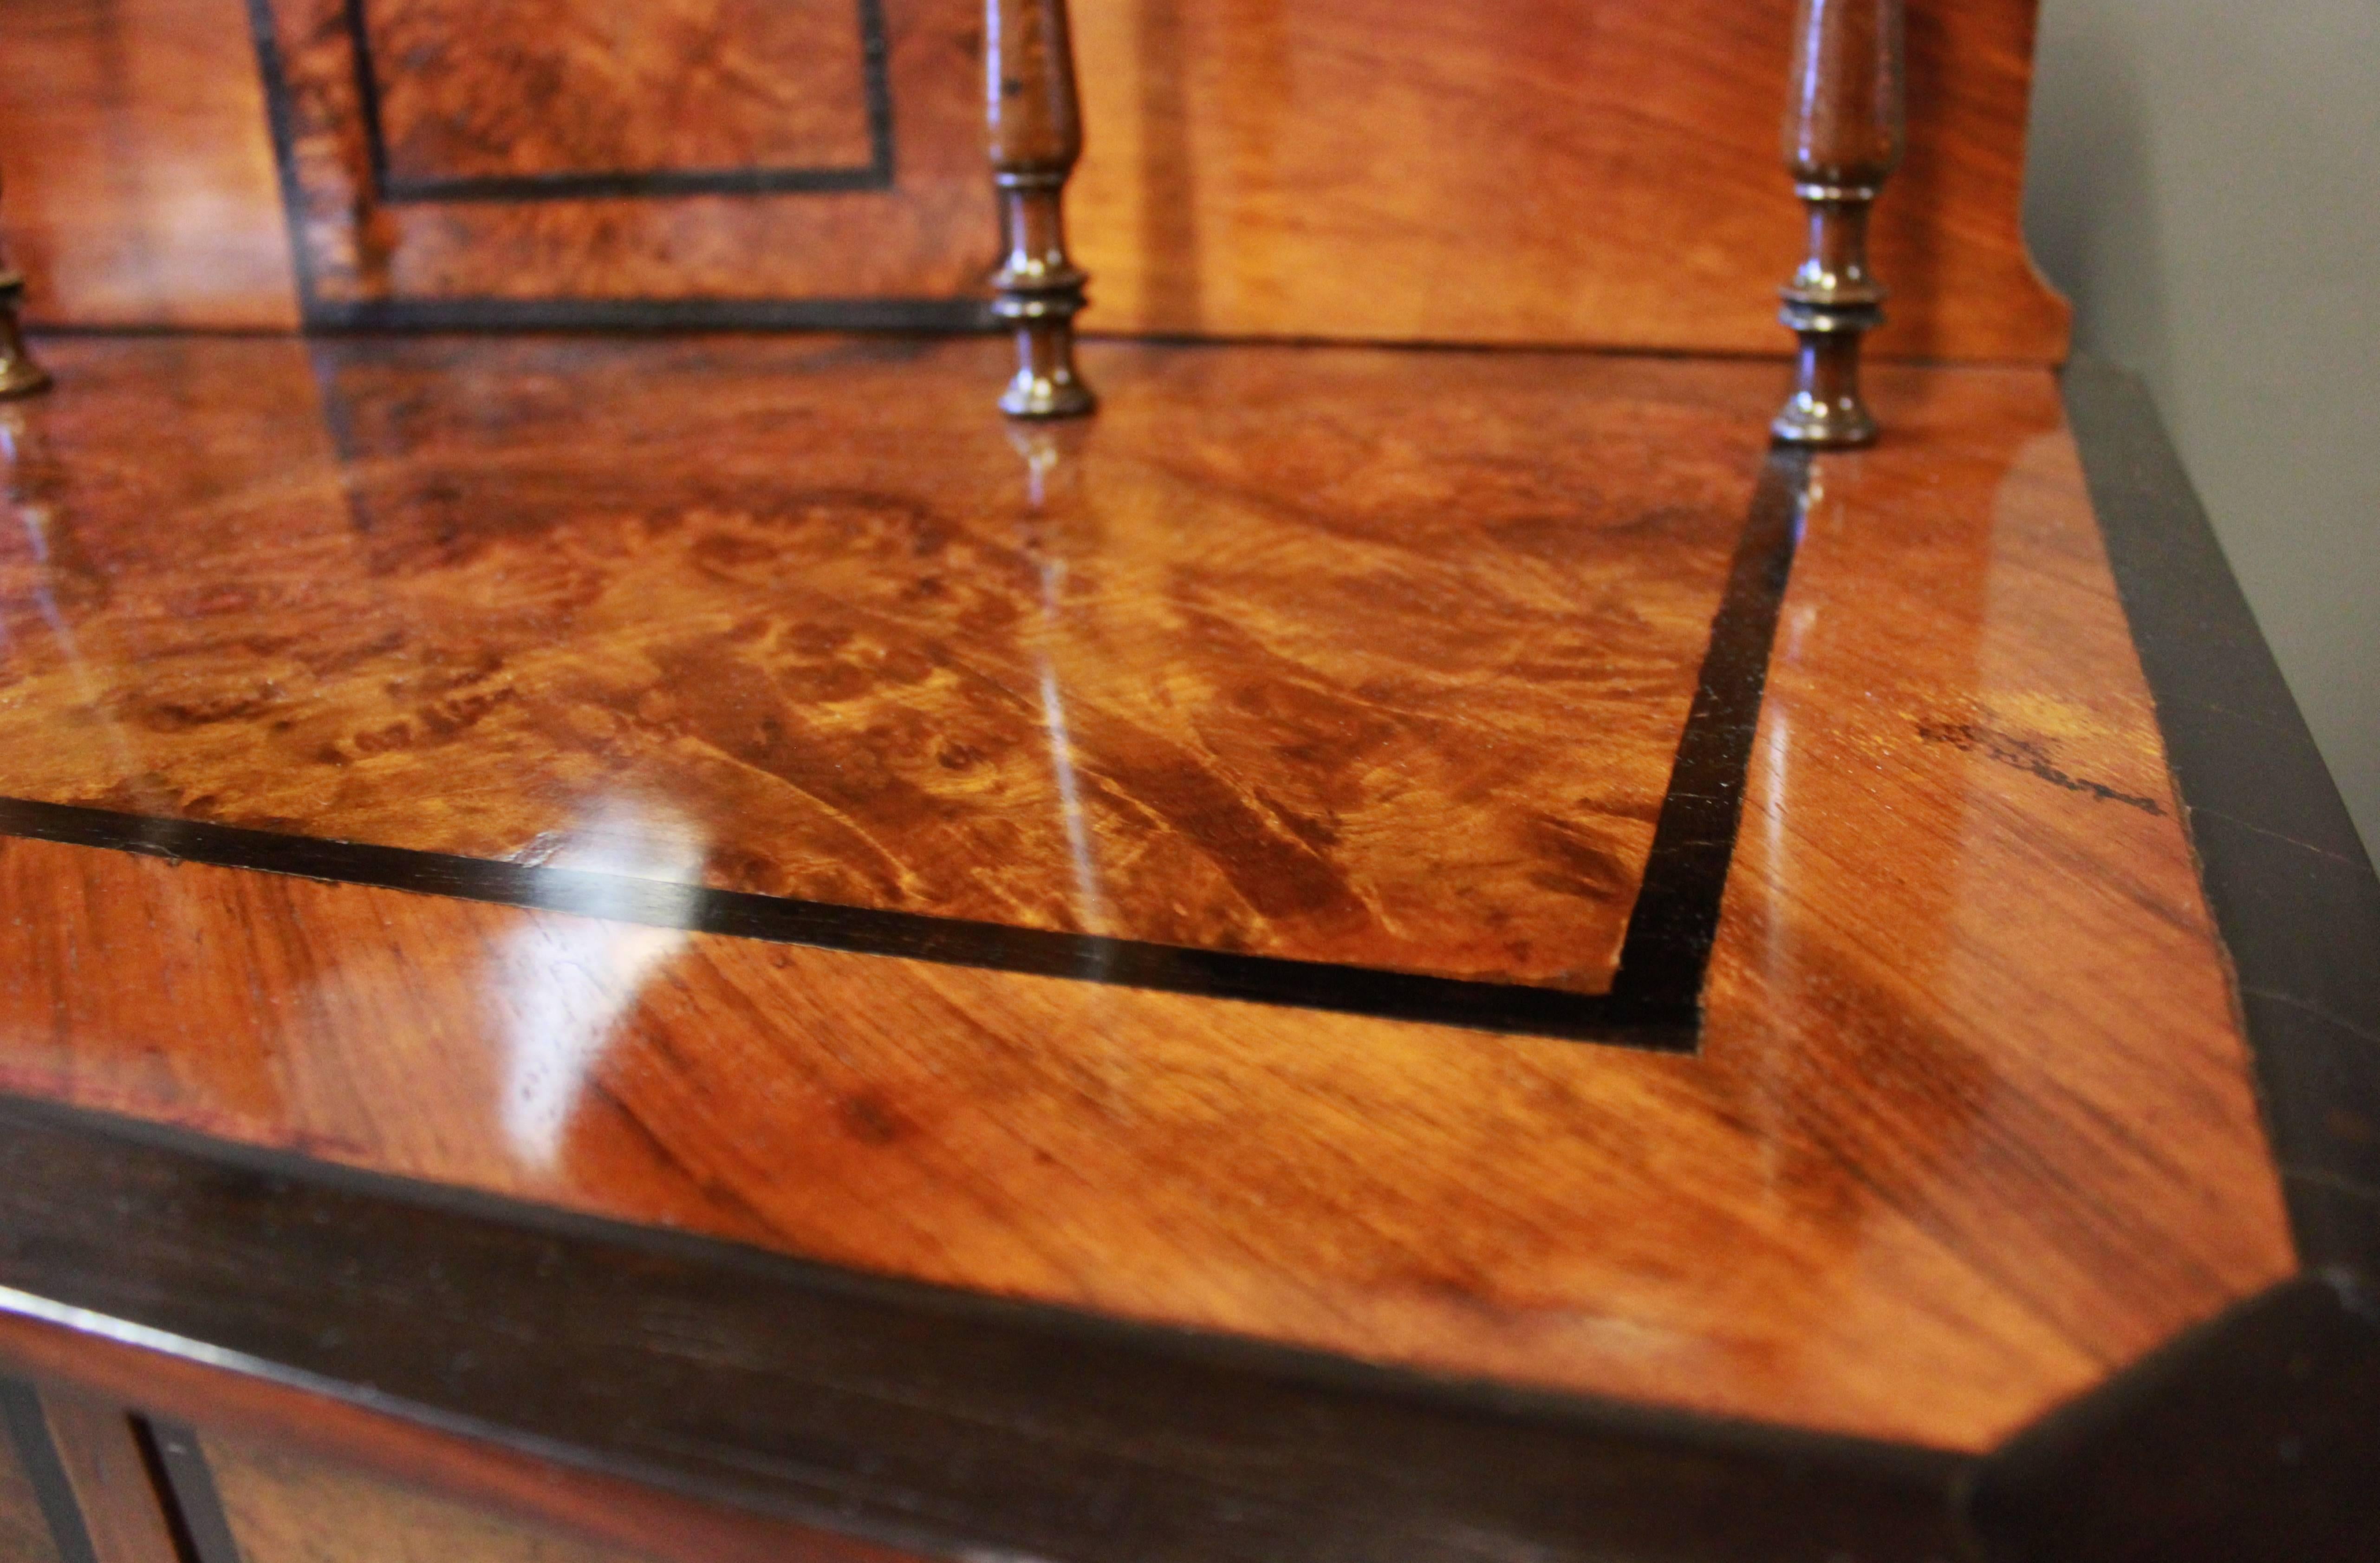 Polished Ladies Desk in Handpolished Walnut from the 1860s